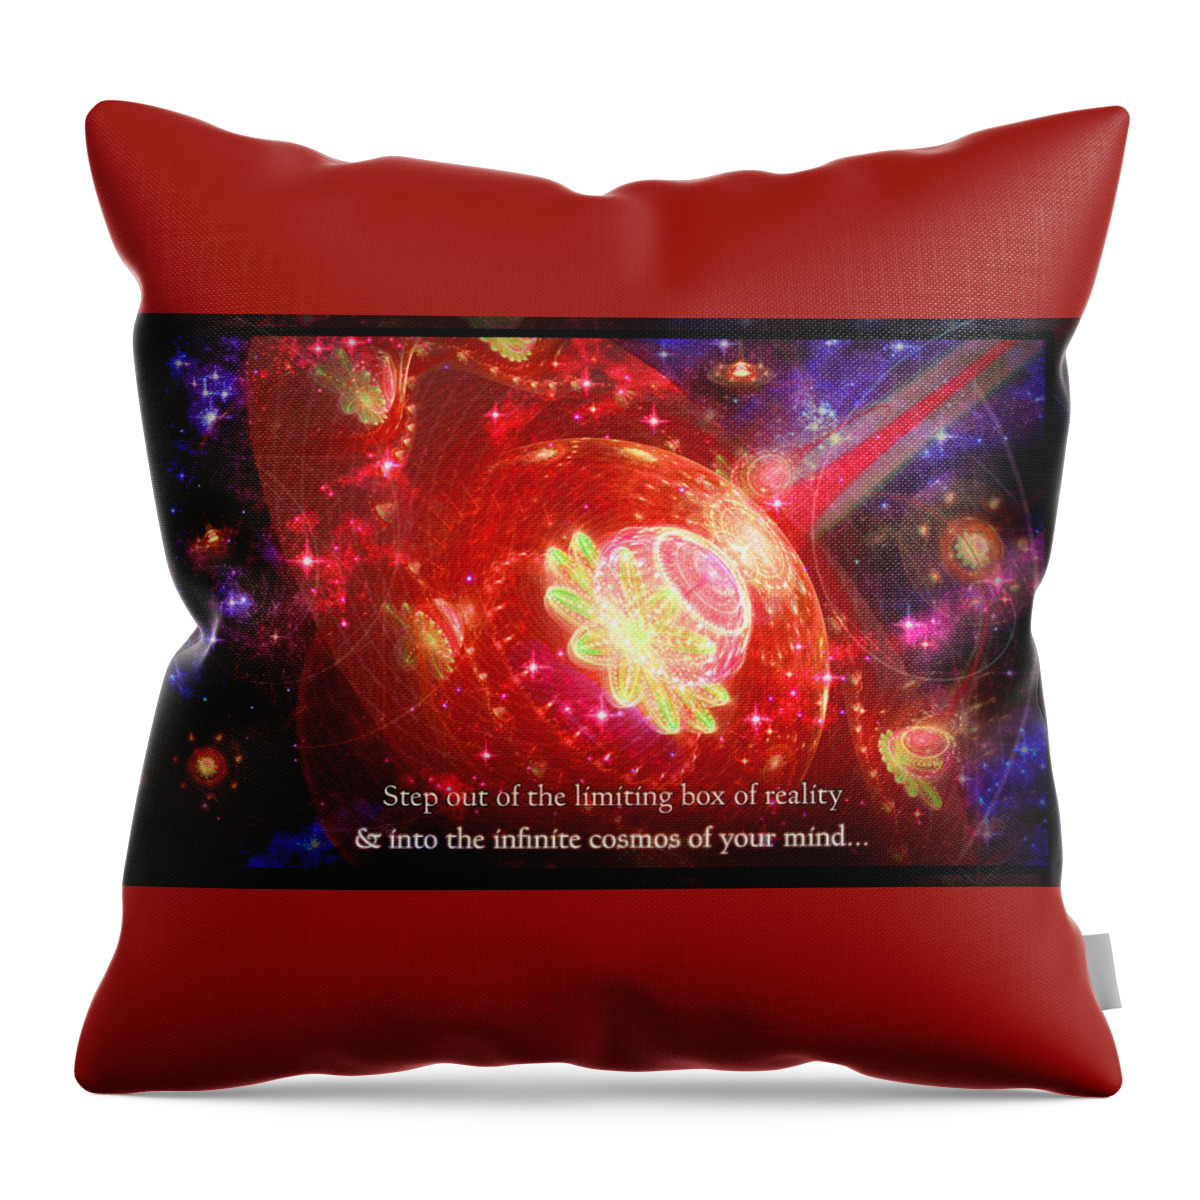 Corporate Throw Pillow featuring the mixed media Cosmic Inspiration God Source by Shawn Dall